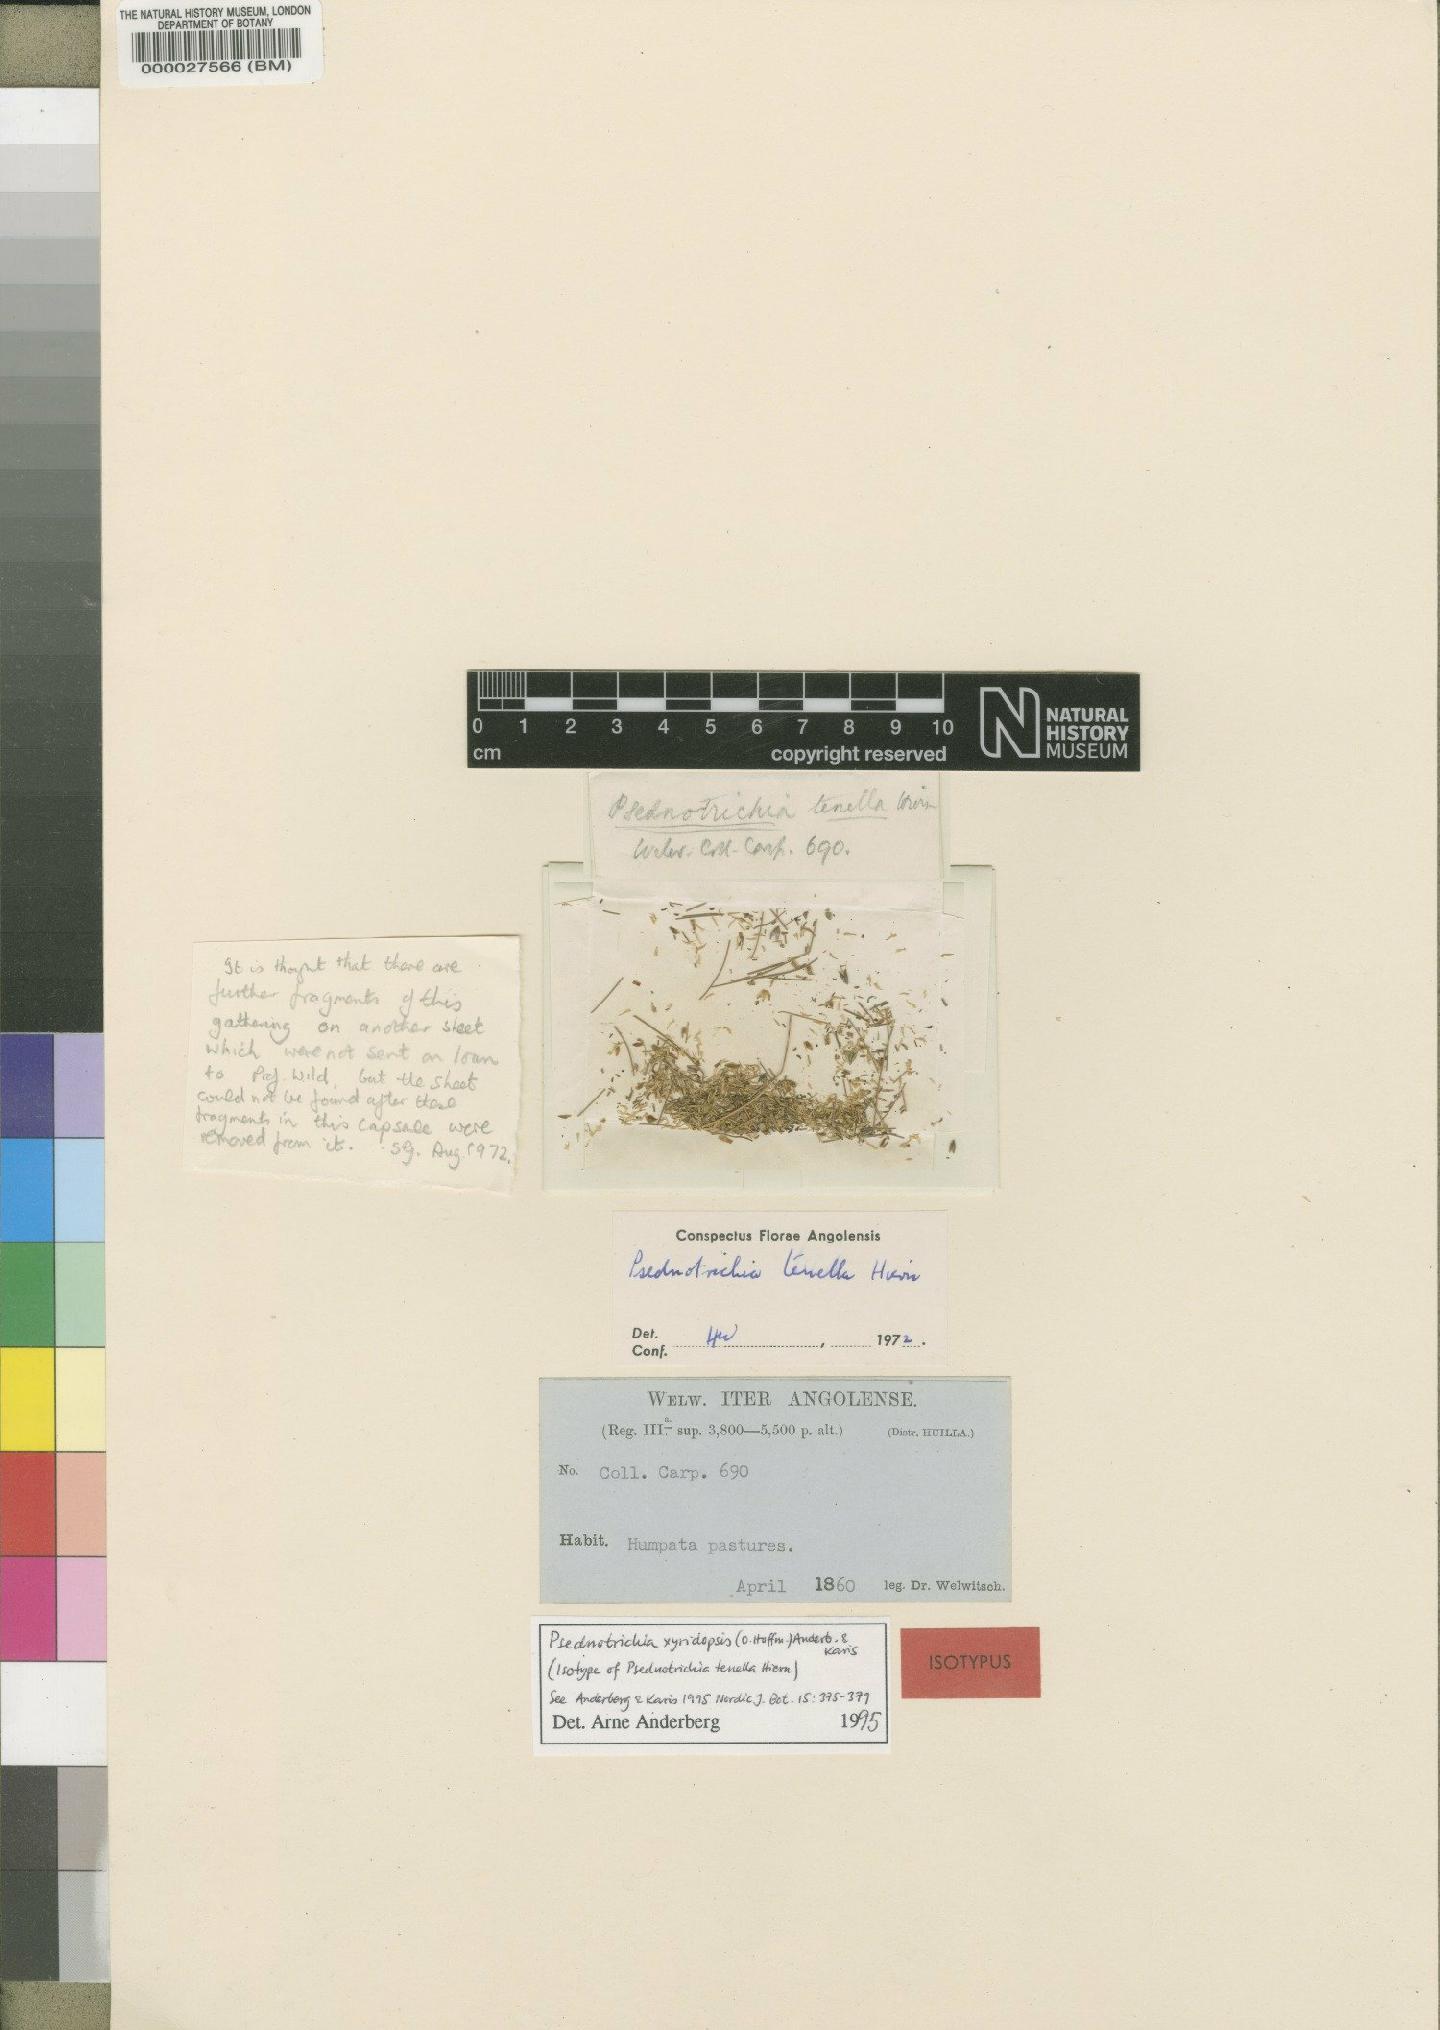 To NHMUK collection (Psednotrichia tenella Hiern; Isotype; NHMUK:ecatalogue:4528768)